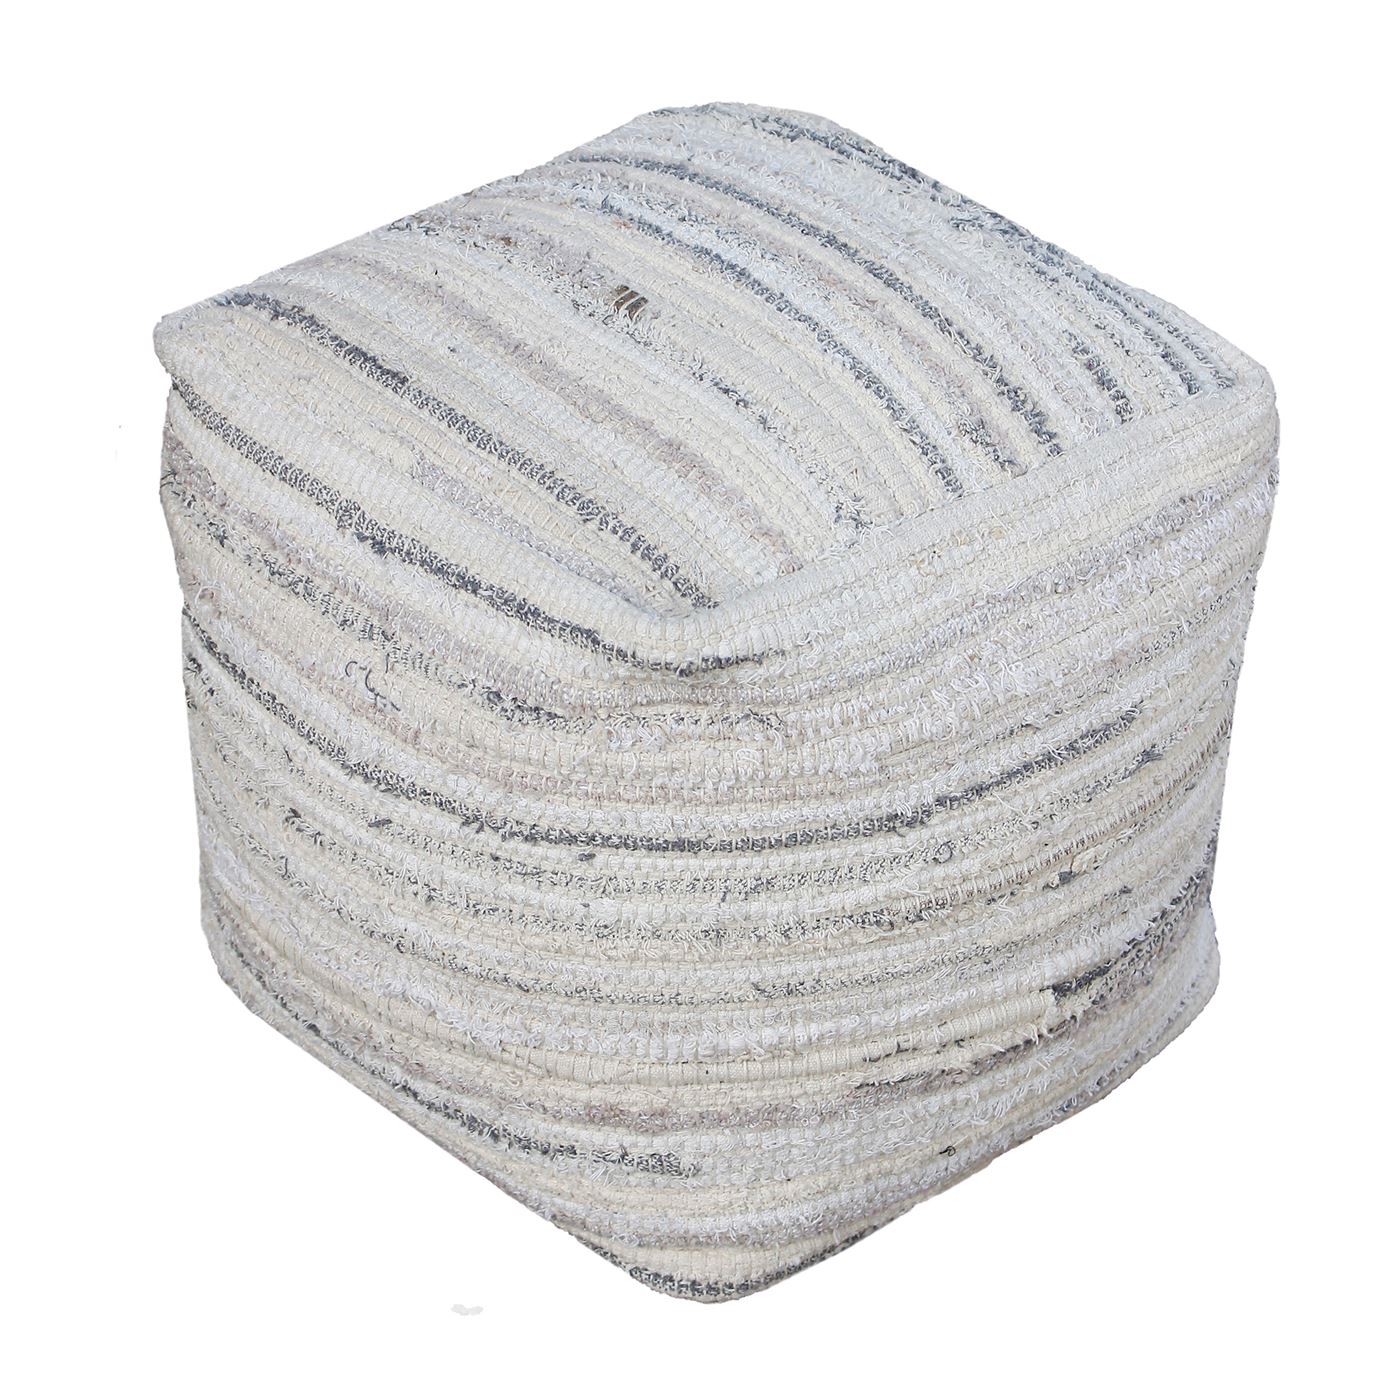 Zakary Pouf, Recycled Cotton, Natural White/Beige, Pitloom, Flat Weave 